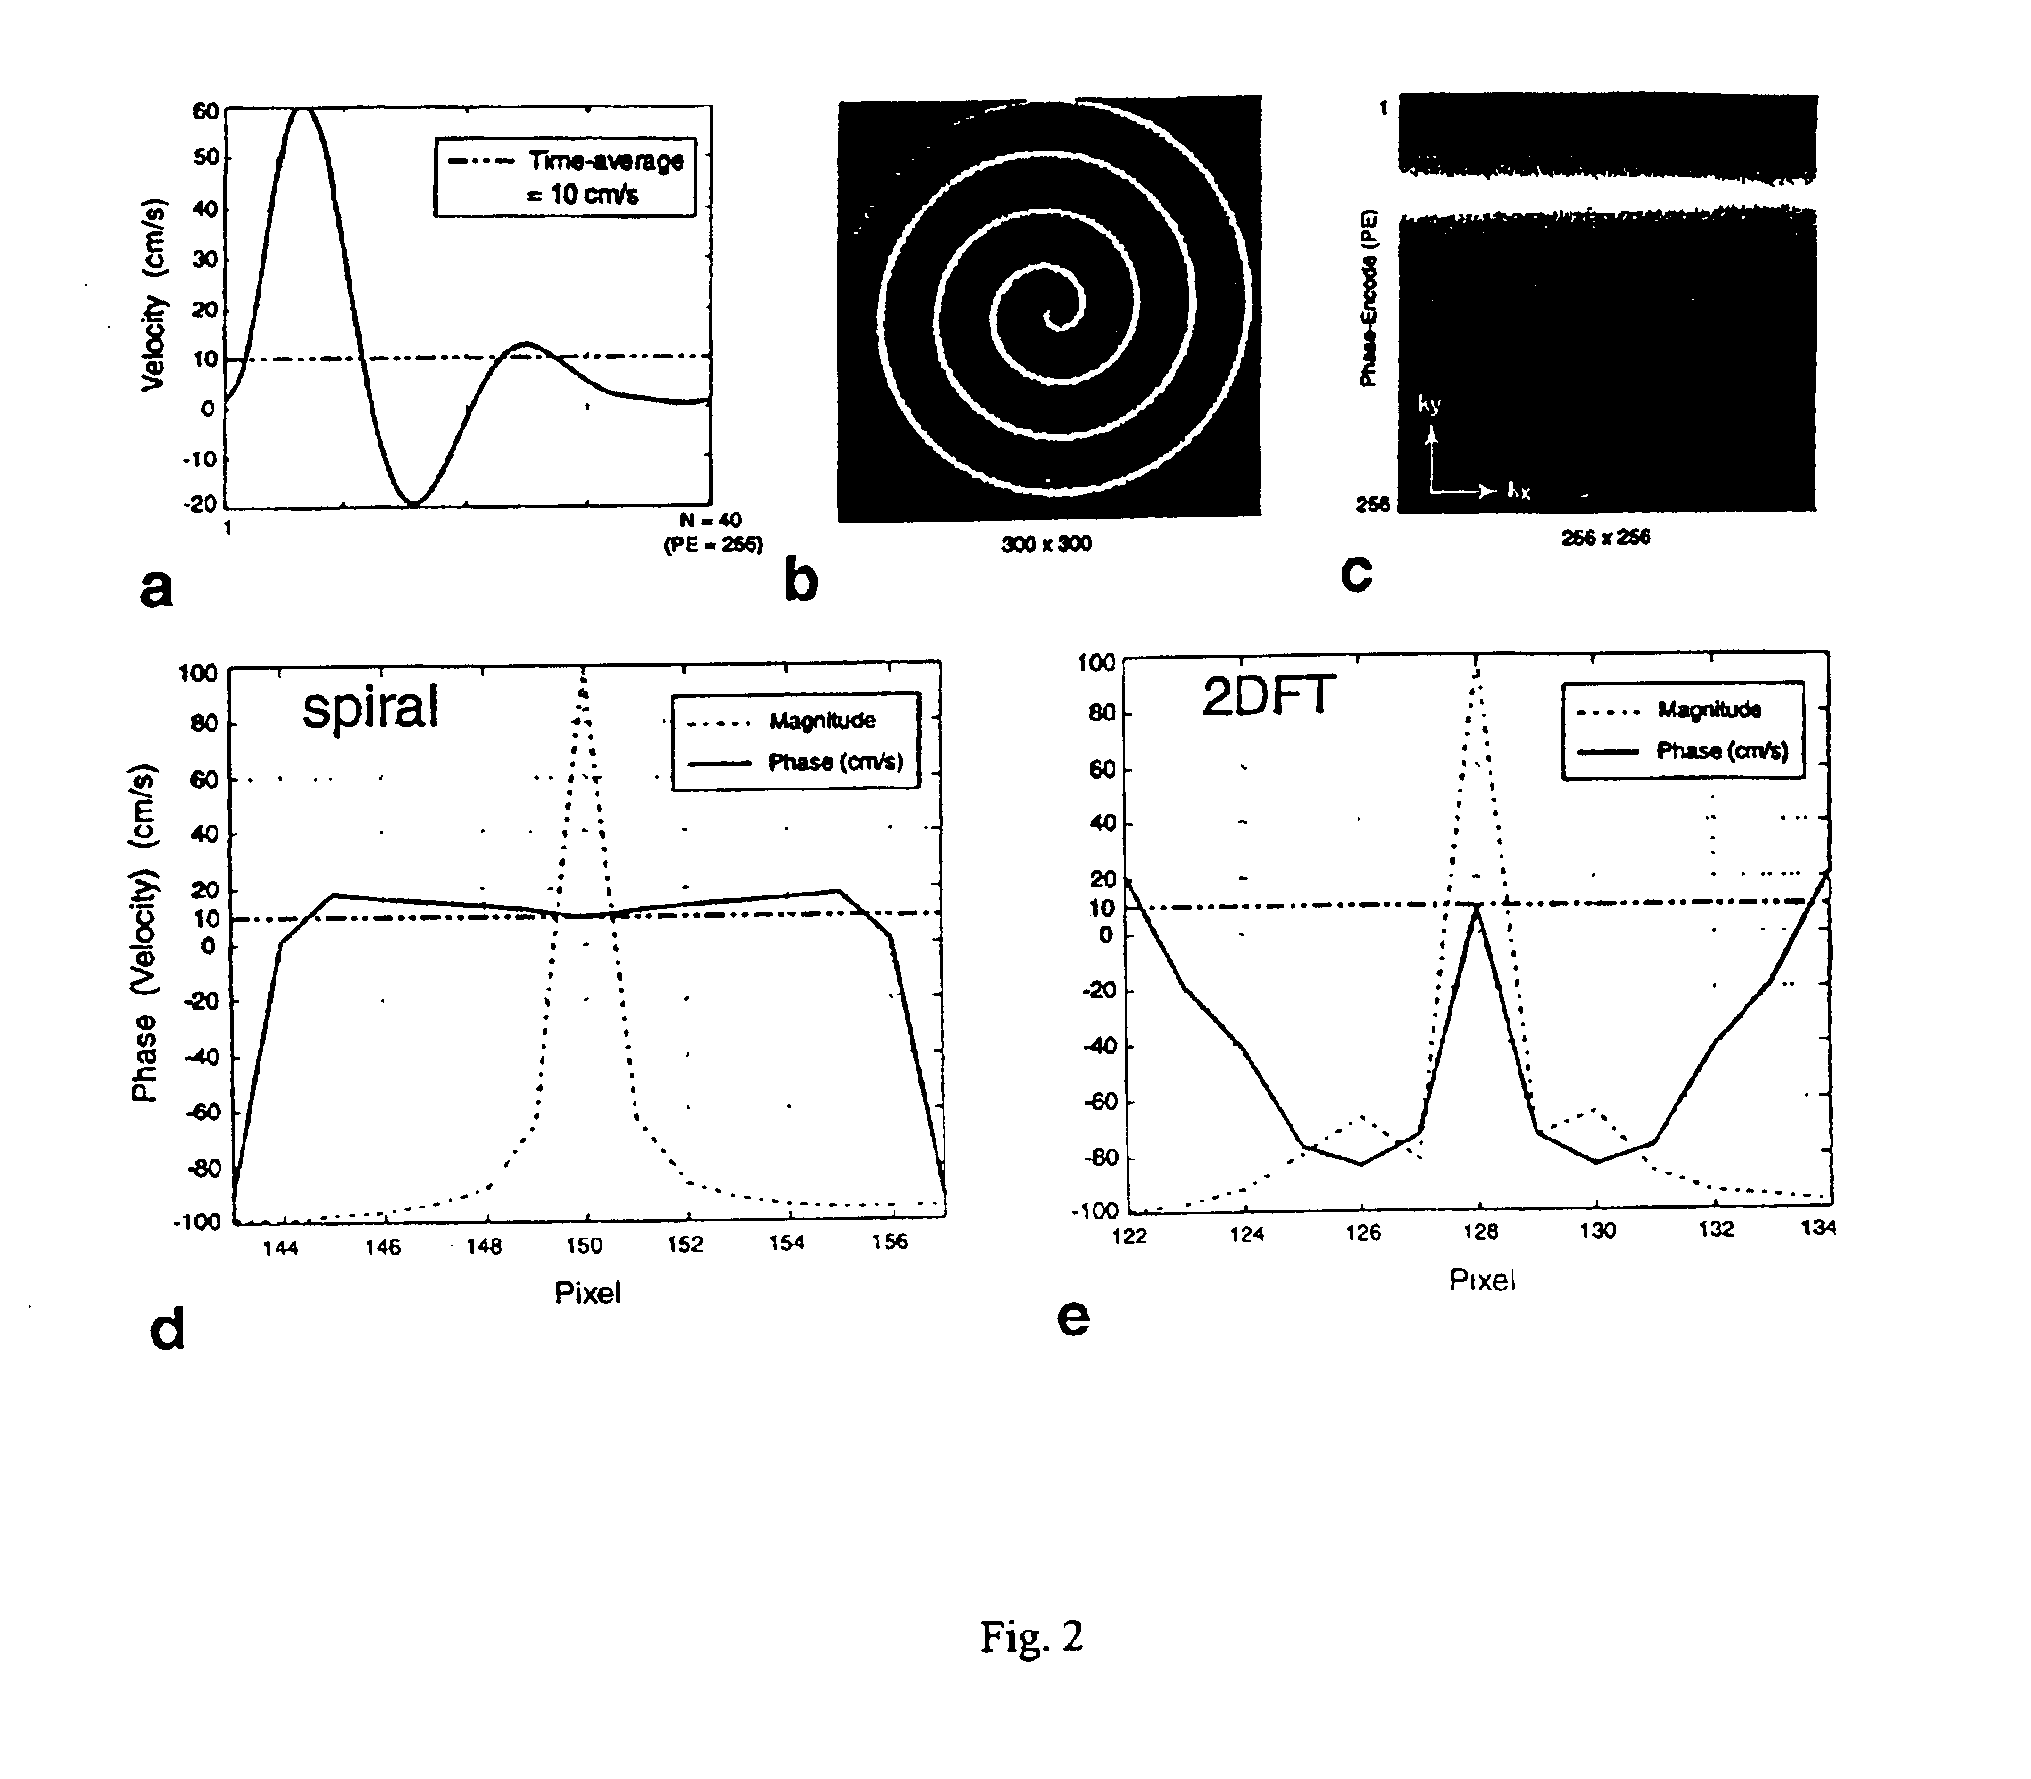 Rapid measurement of time-averaged blood flow using ungated spiral phase-contrast MRI